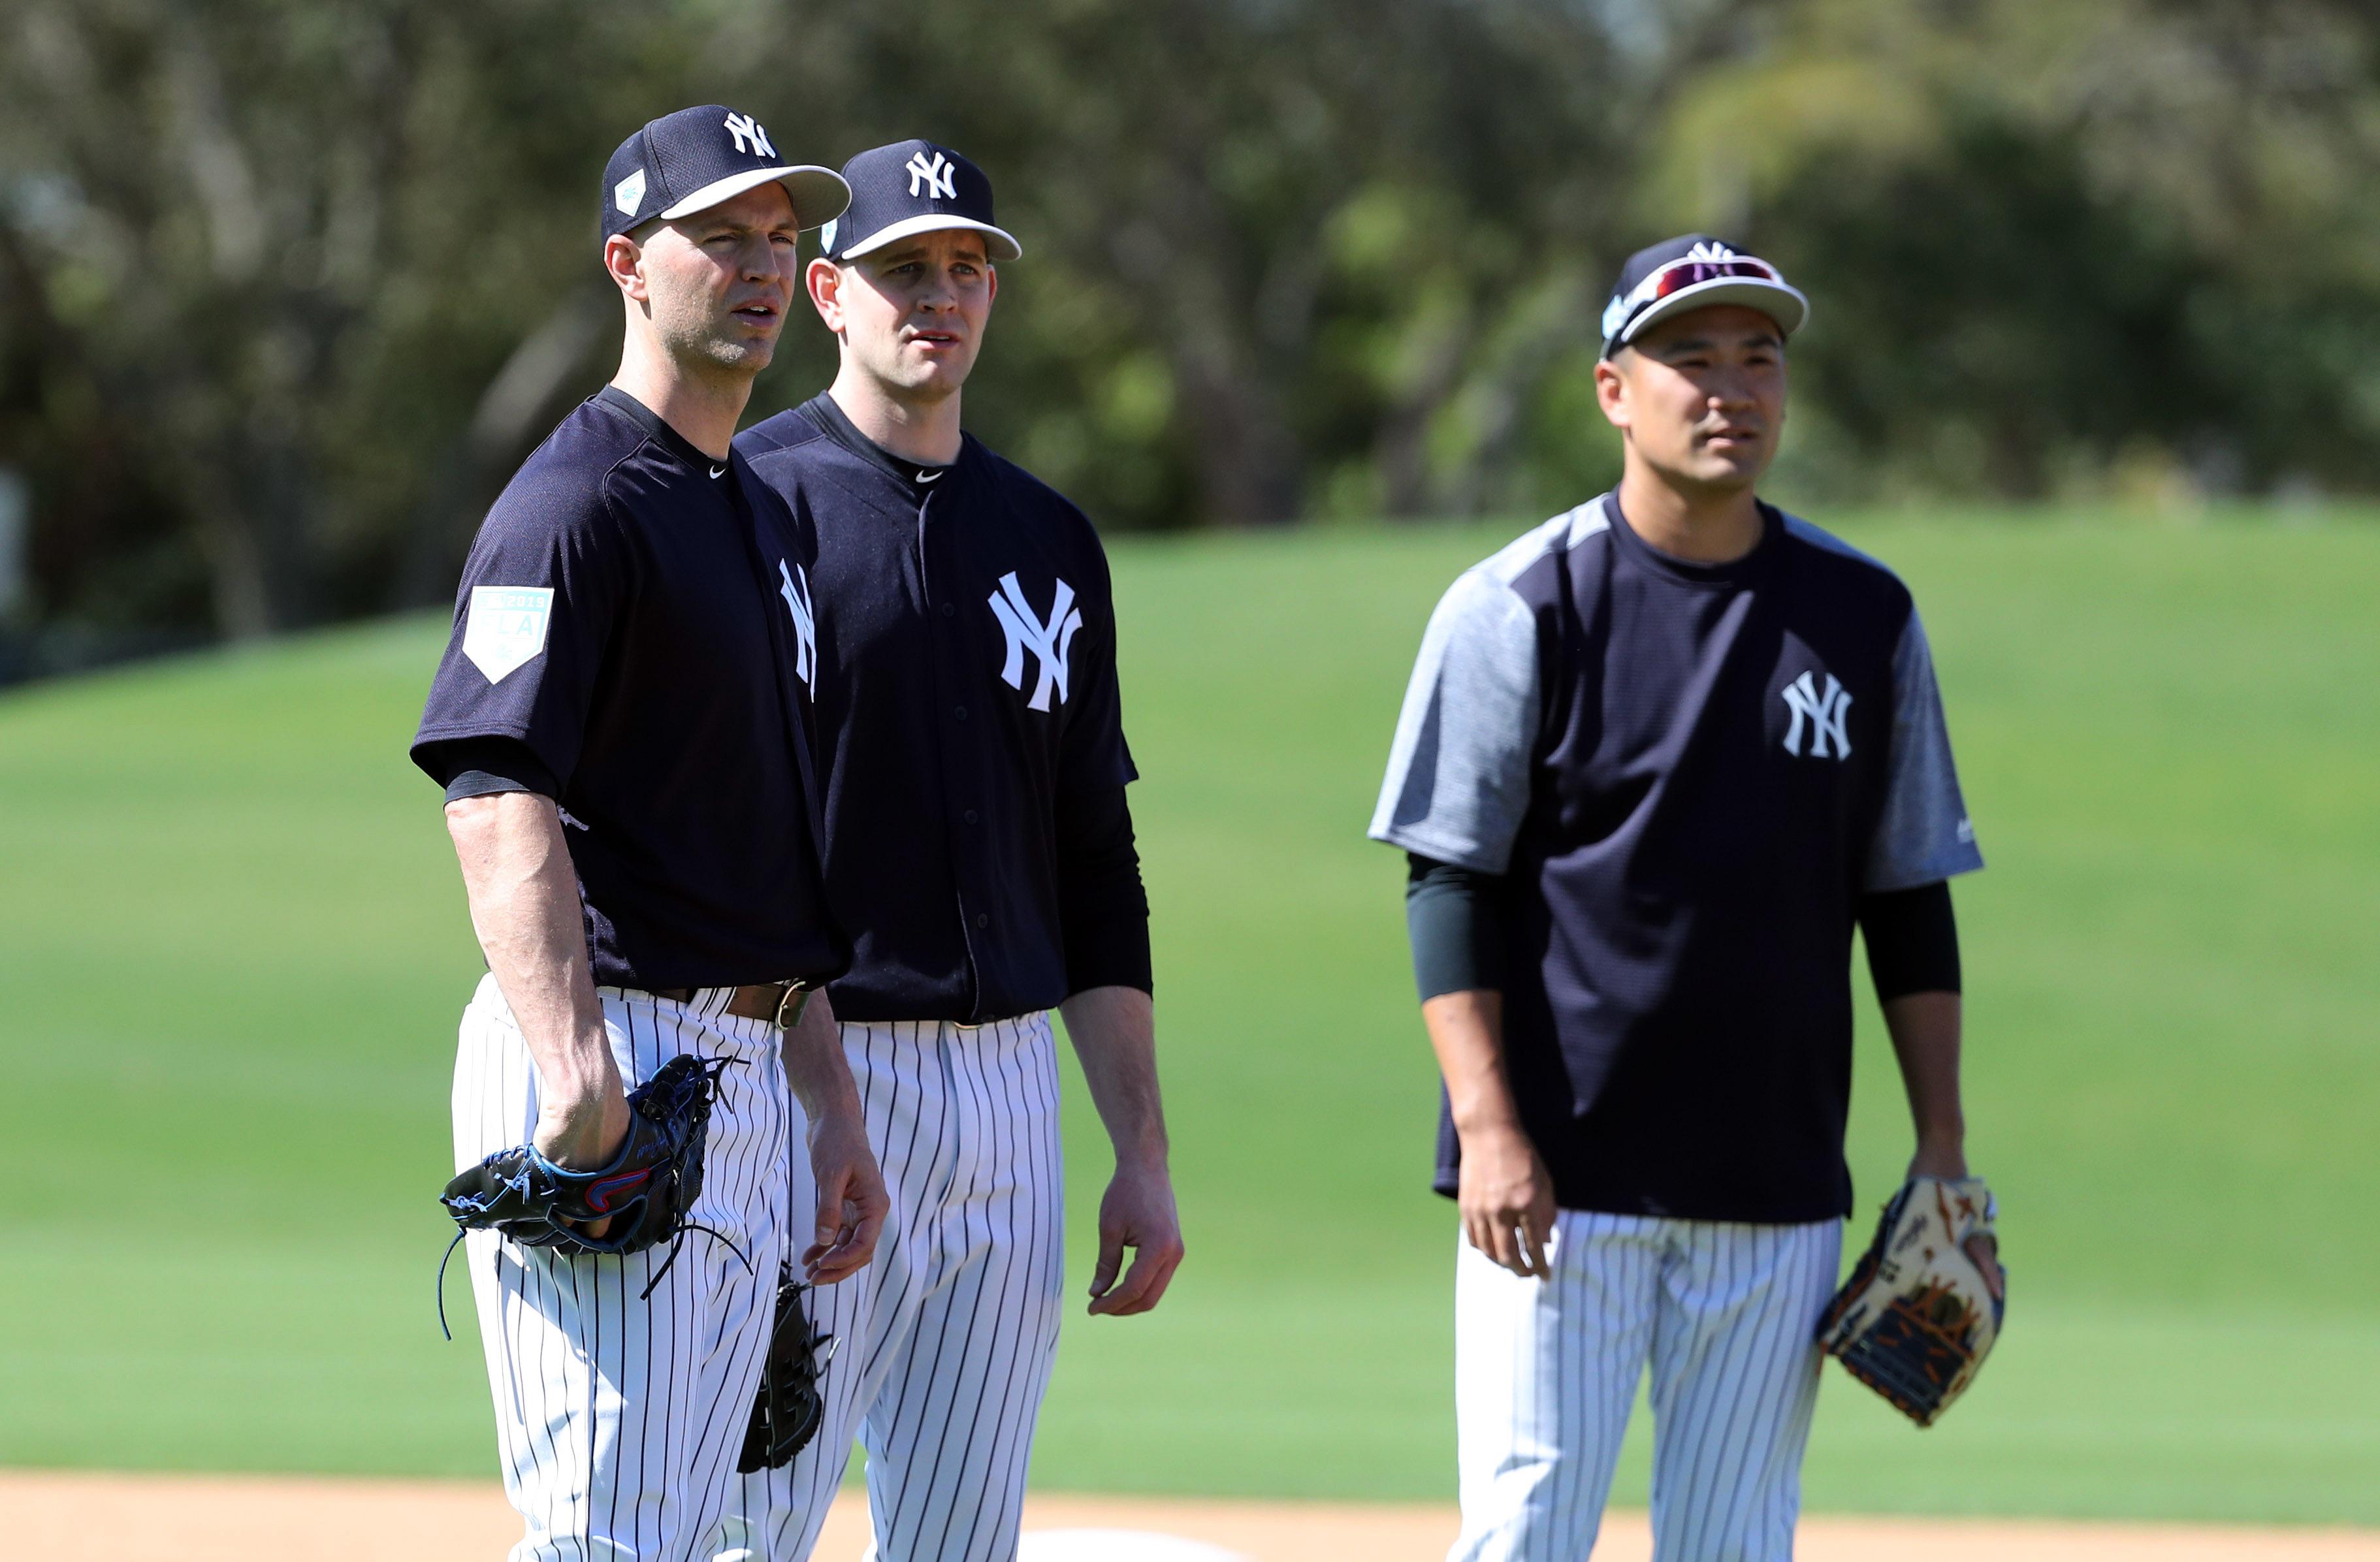 Feb 14, 2019; Tampa, FL, USA;New York Yankees starting pitcher J.A. Happ (34), starting pitcher James Paxton (65), starting pitcher Masahiro Tanaka (19) look on as they practice during spring training at George M. Steinbrenner Field. Mandatory Credit: Kim Klement-USA TODAY Sports / © Kim Klement-USA TODAY Sports